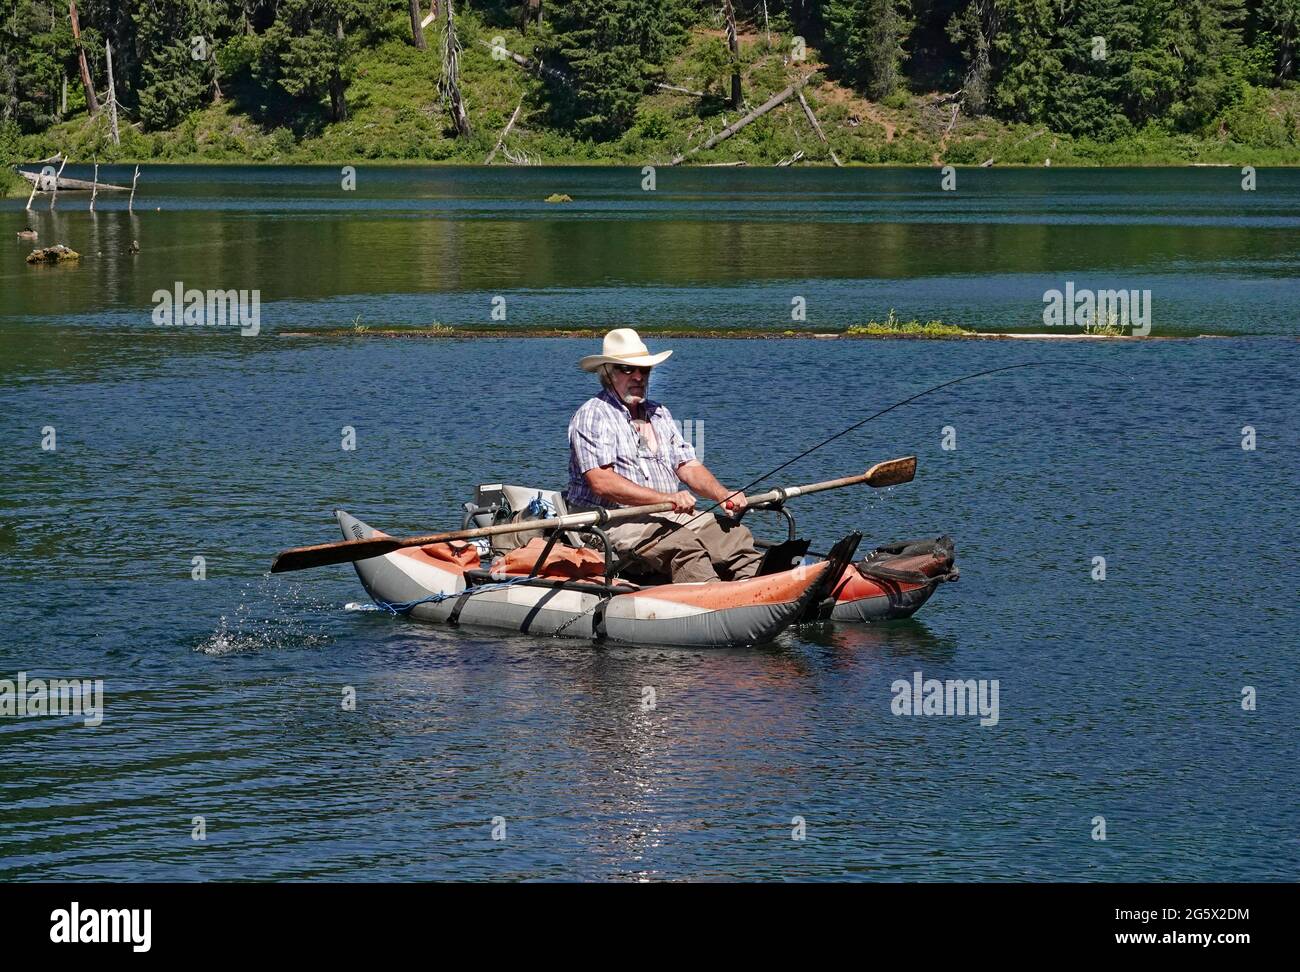 A middle-aged fisherman cooling off in a rubber raft on Clear Lake on a hot summer day in the Oregon Cascades. Stock Photo